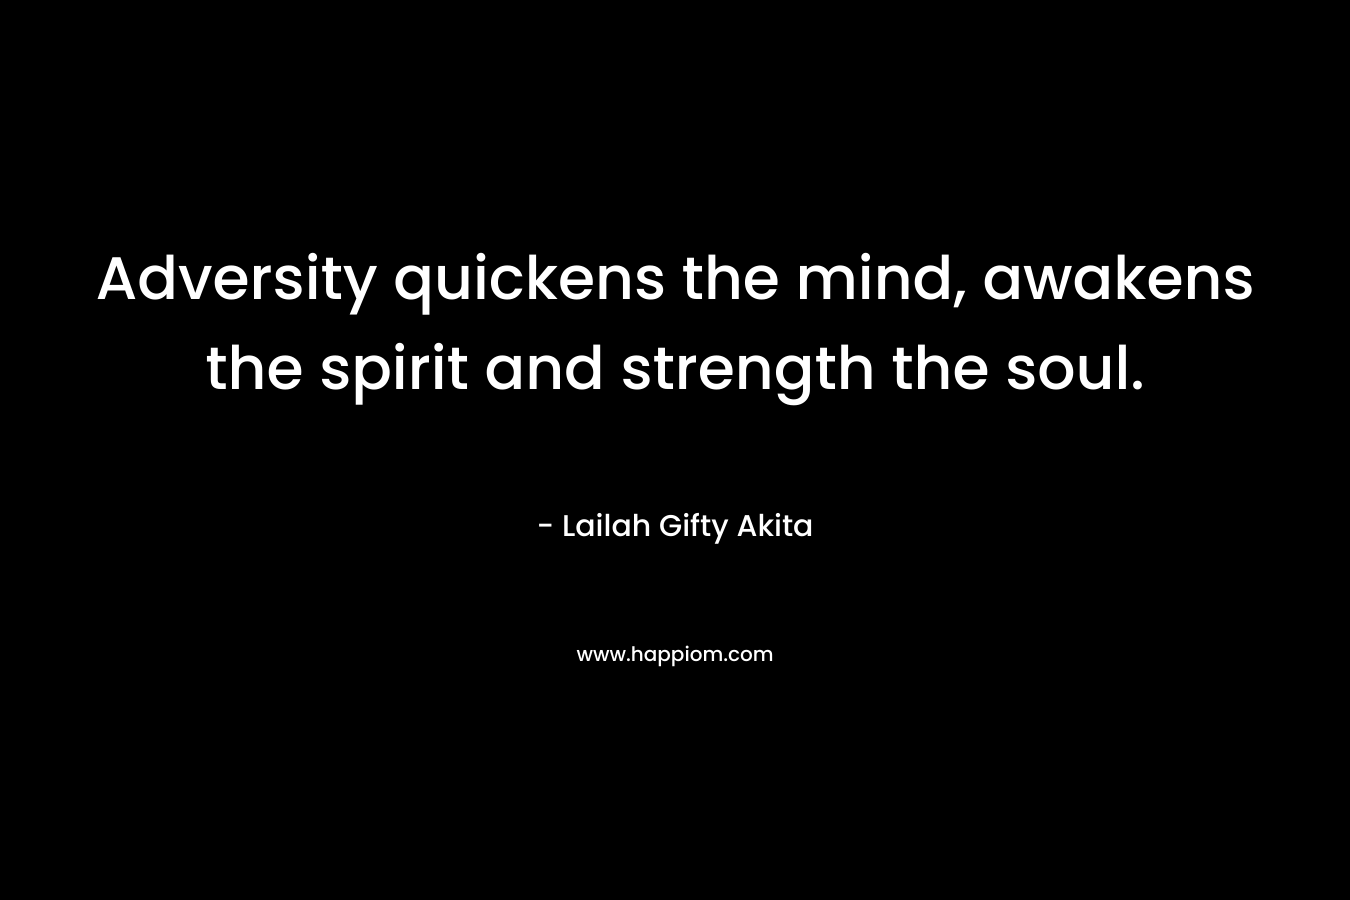 Adversity quickens the mind, awakens the spirit and strength the soul.